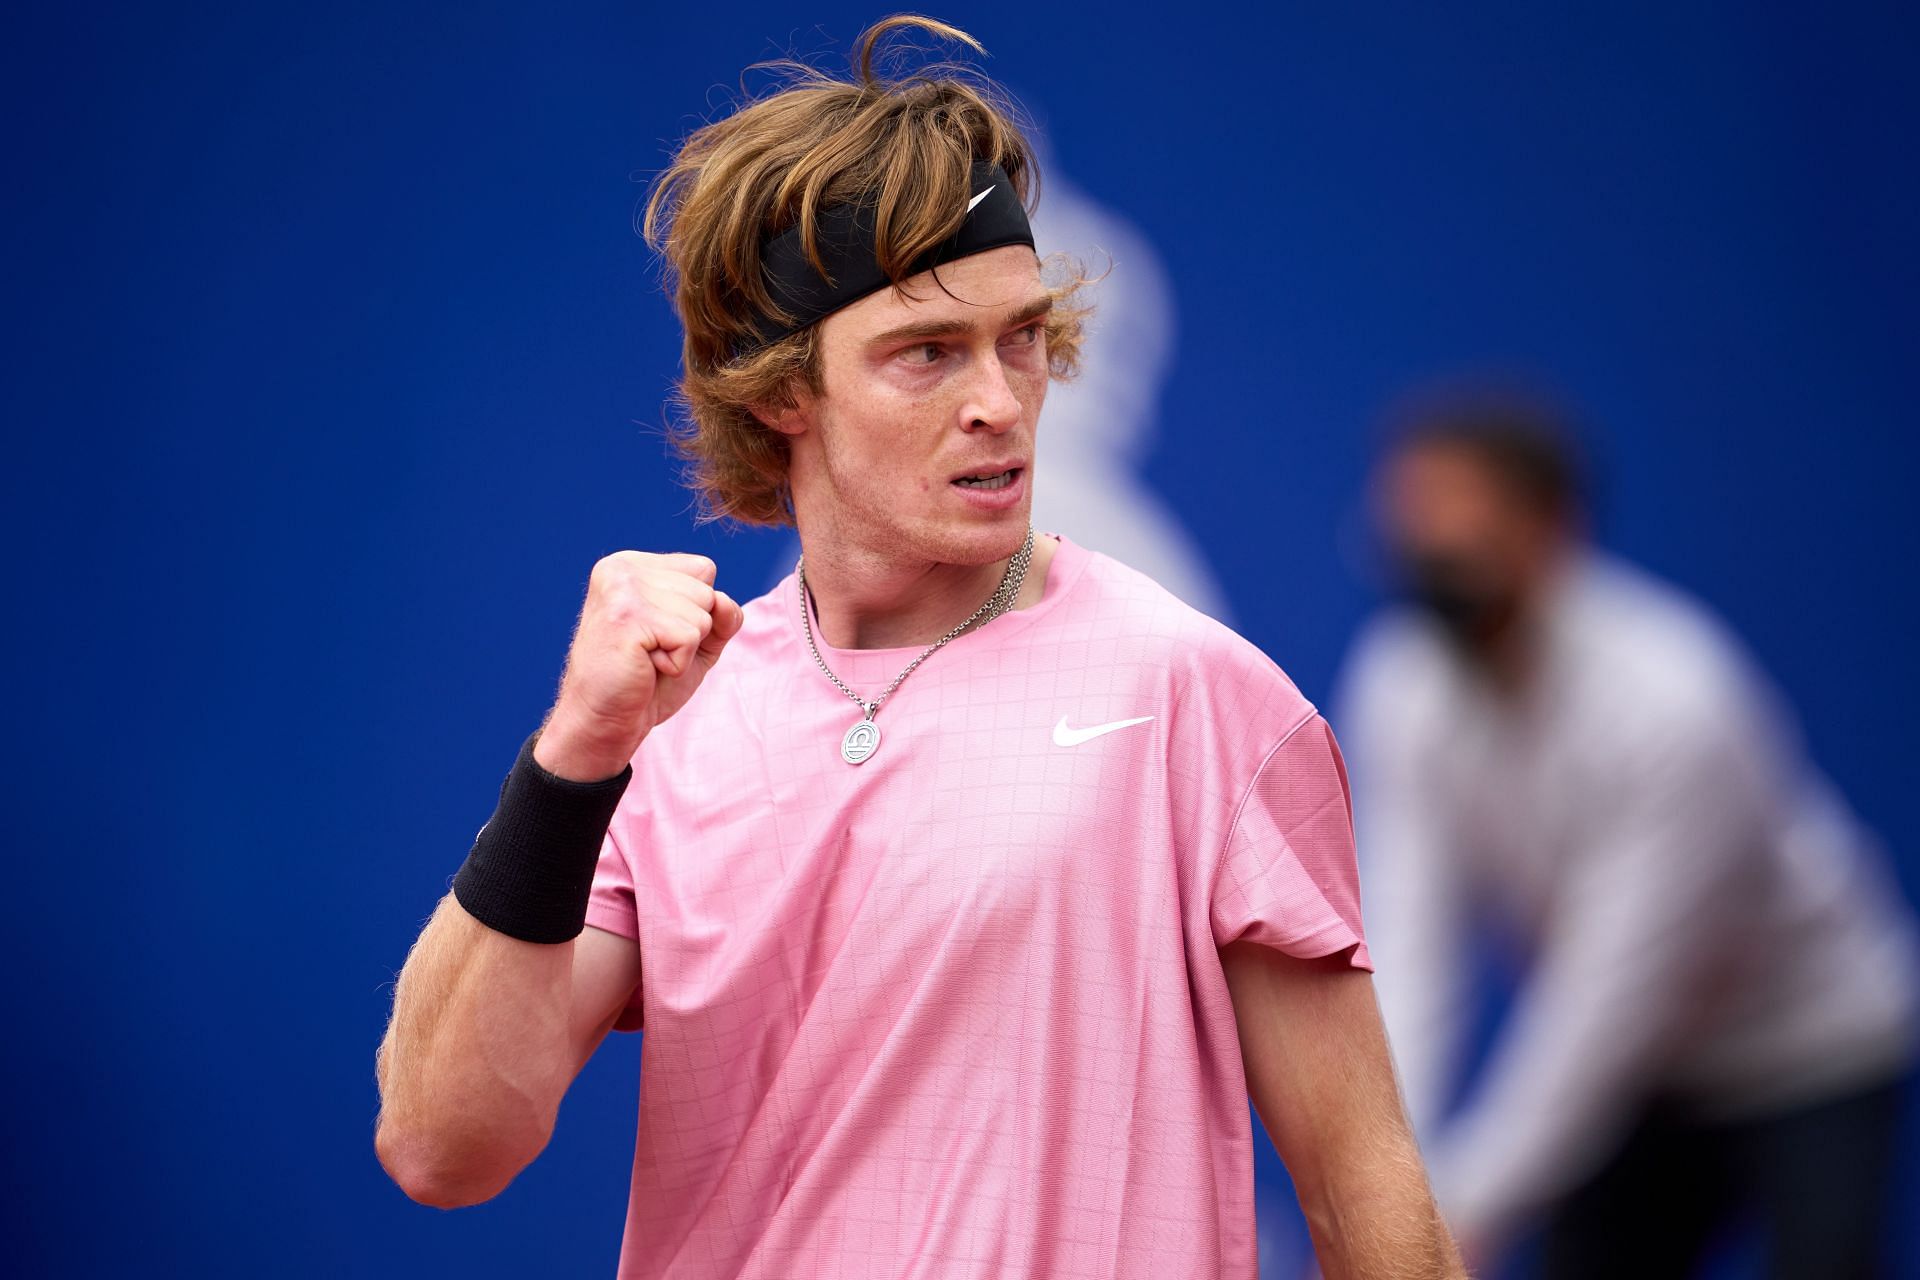 Andrey Rublev at the 2021 Barcelona Open.